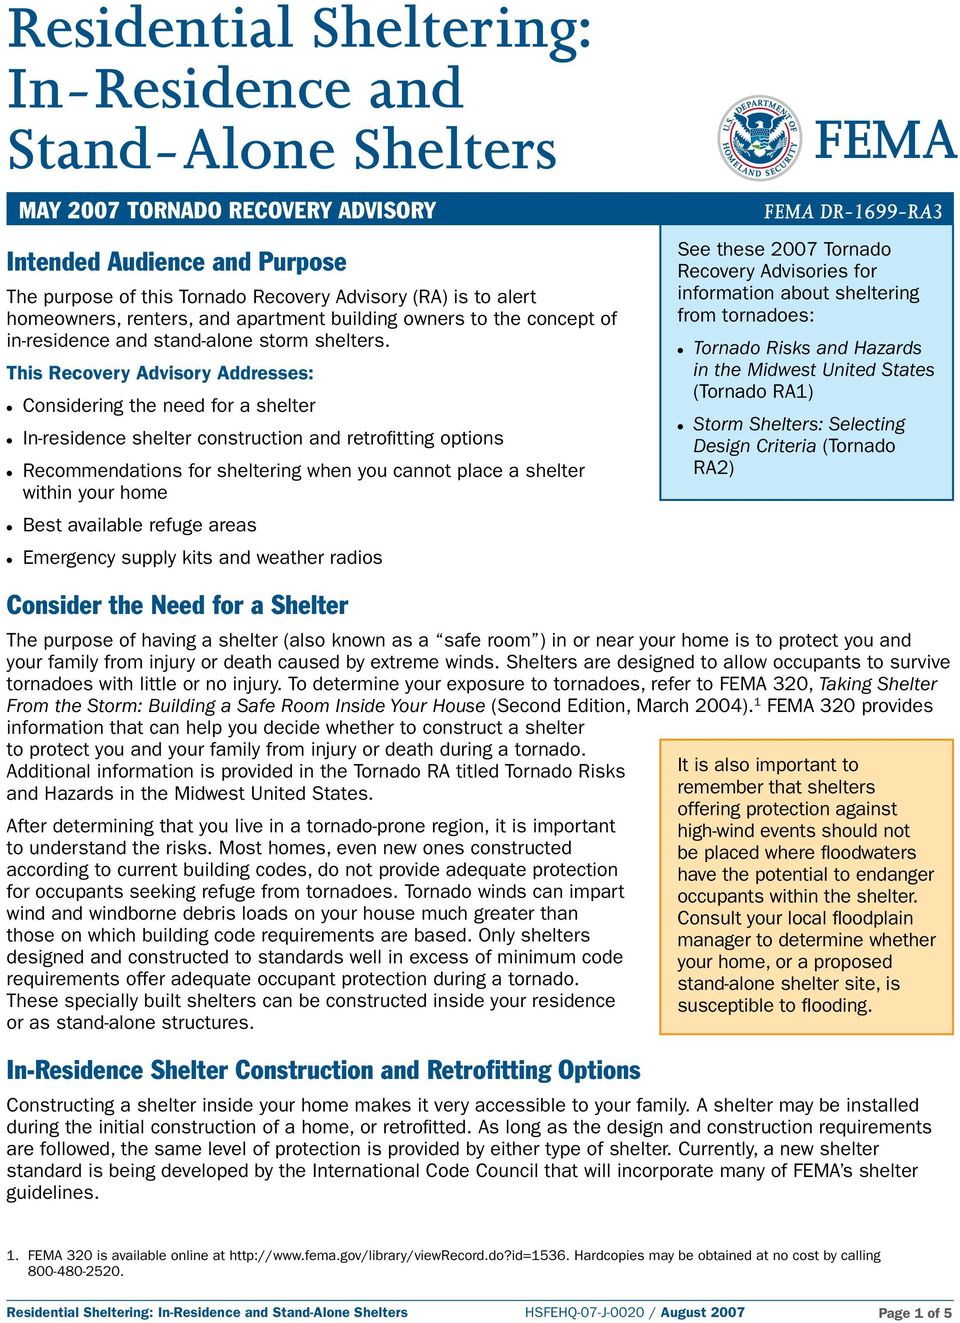 This Recovery Advisory Addresses: MAY 2007 TORNADO RECOVERY ADVISORY Considering the need for a shelter In-residence shelter construction and retrofitting options Recommendations for sheltering when